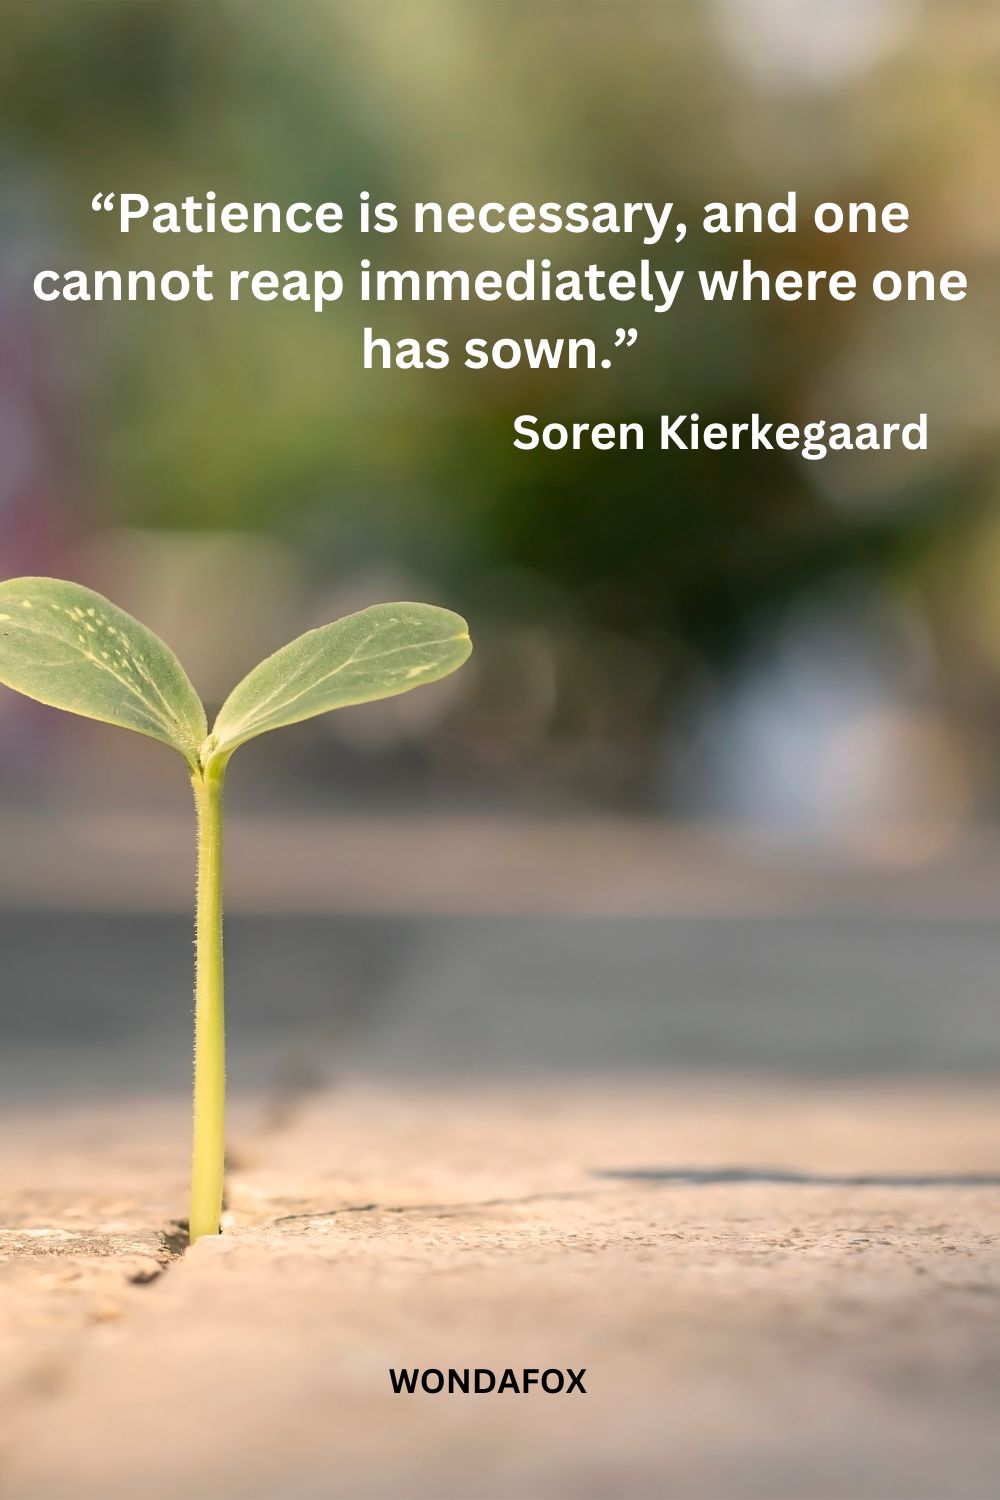 “Patience is necessary, and one cannot reap immediately where one has sown.”
Soren Kierkegaard